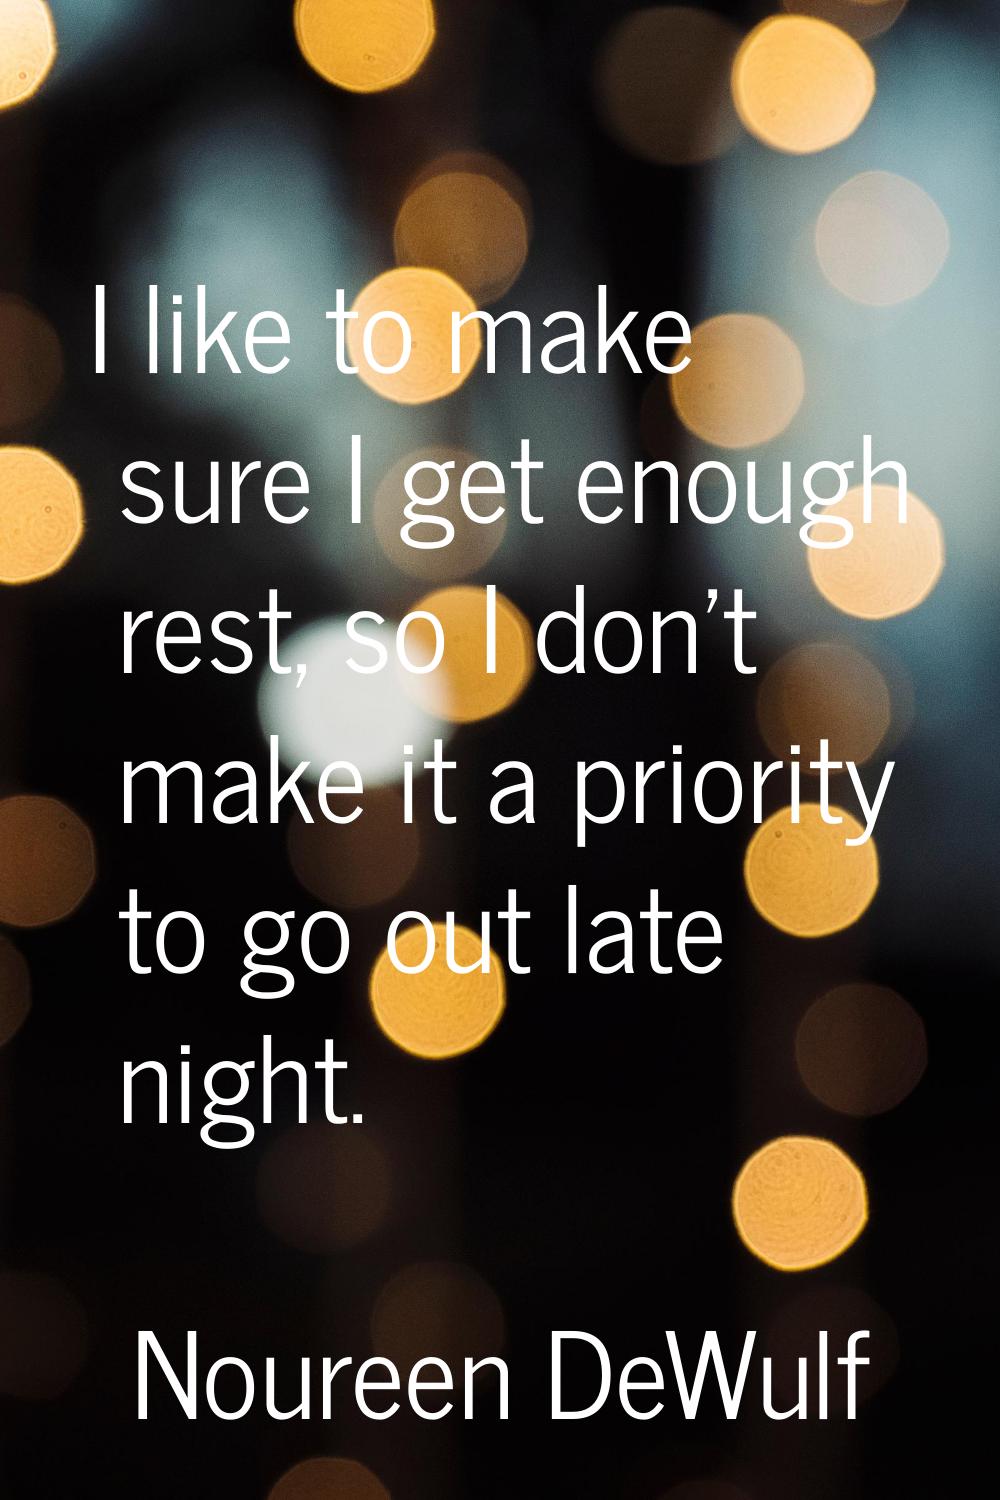 I like to make sure I get enough rest, so I don't make it a priority to go out late night.